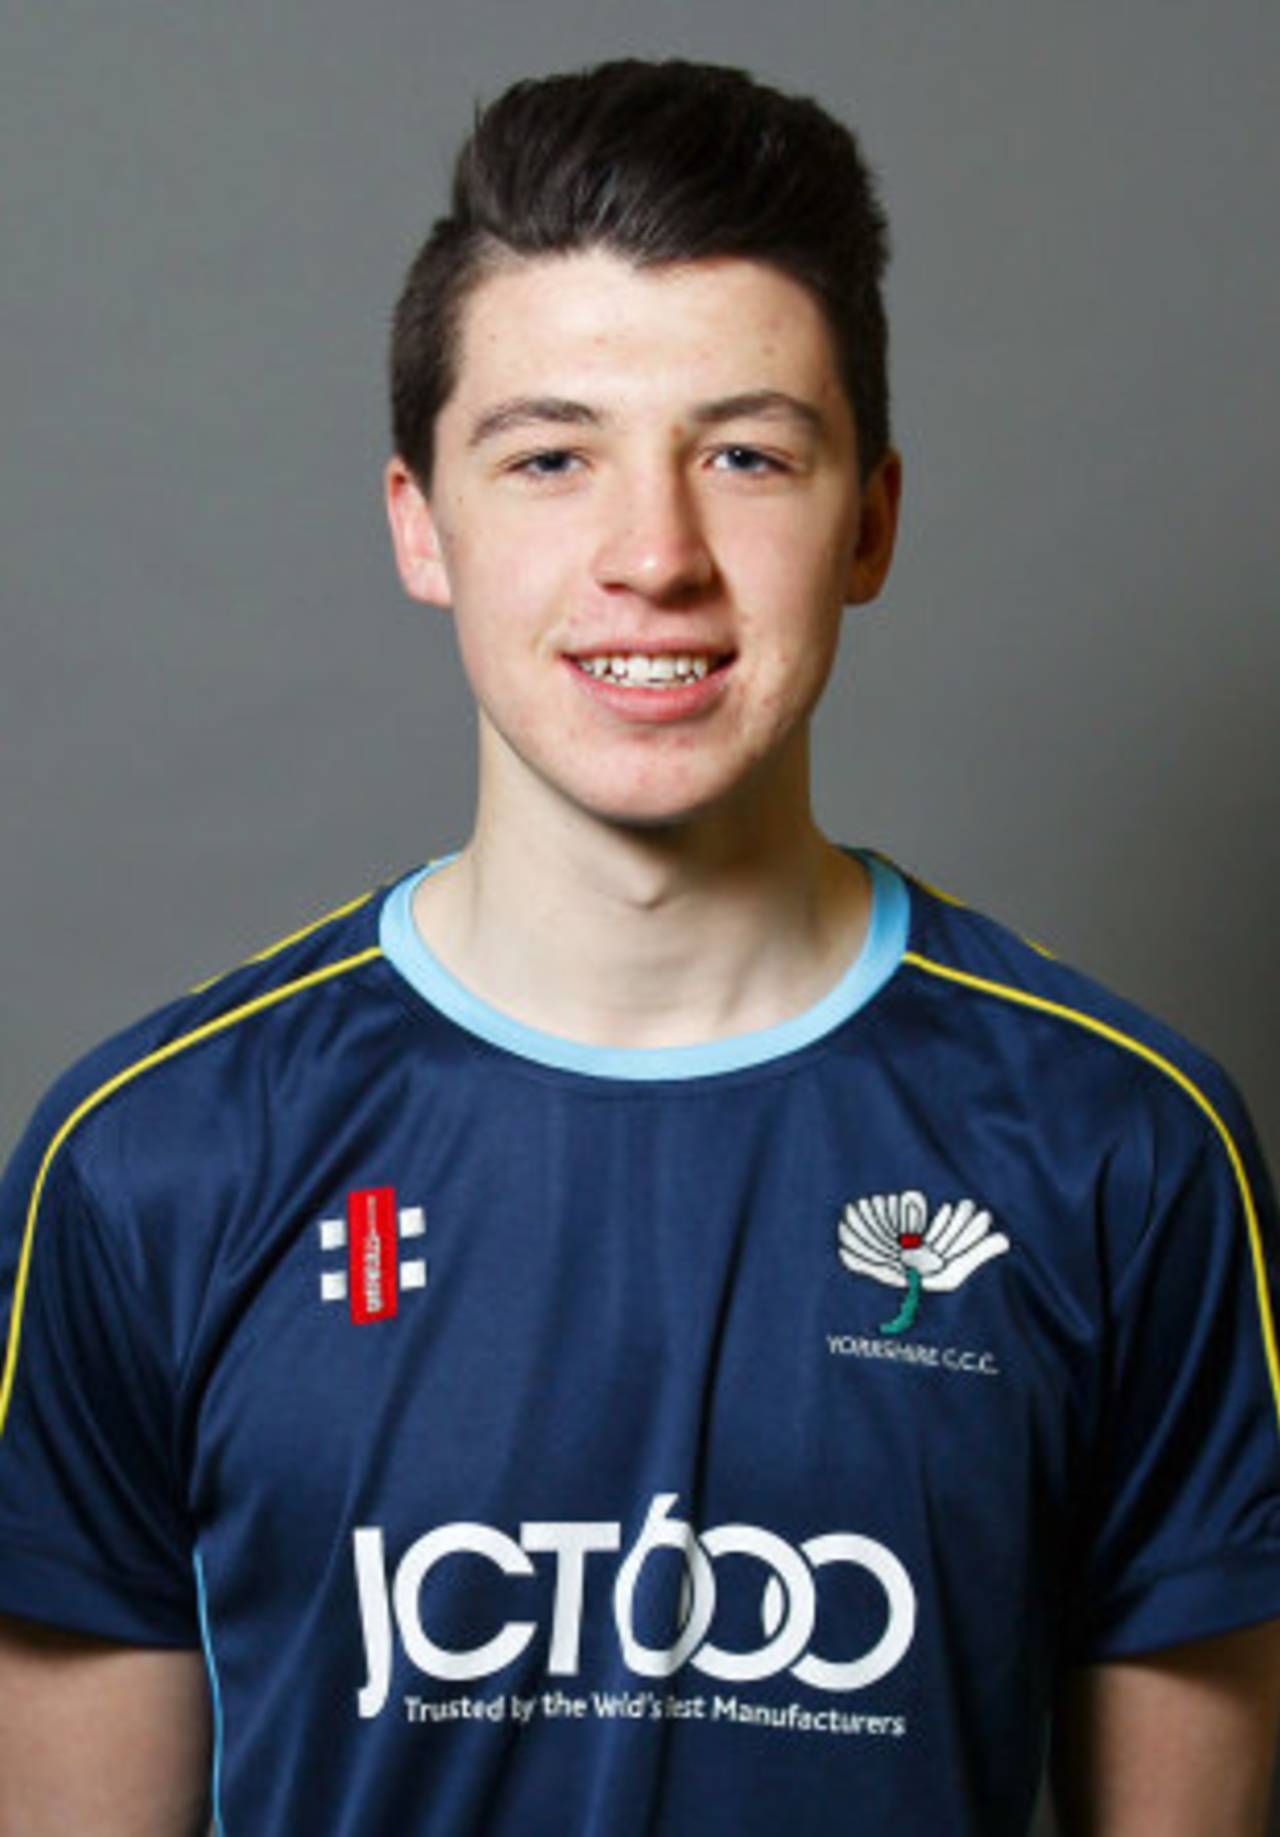 Matthew Fisher's rapid rise has continued with a place in the England Under-19 squad&nbsp;&nbsp;&bull;&nbsp;&nbsp;Yorkshire CCC